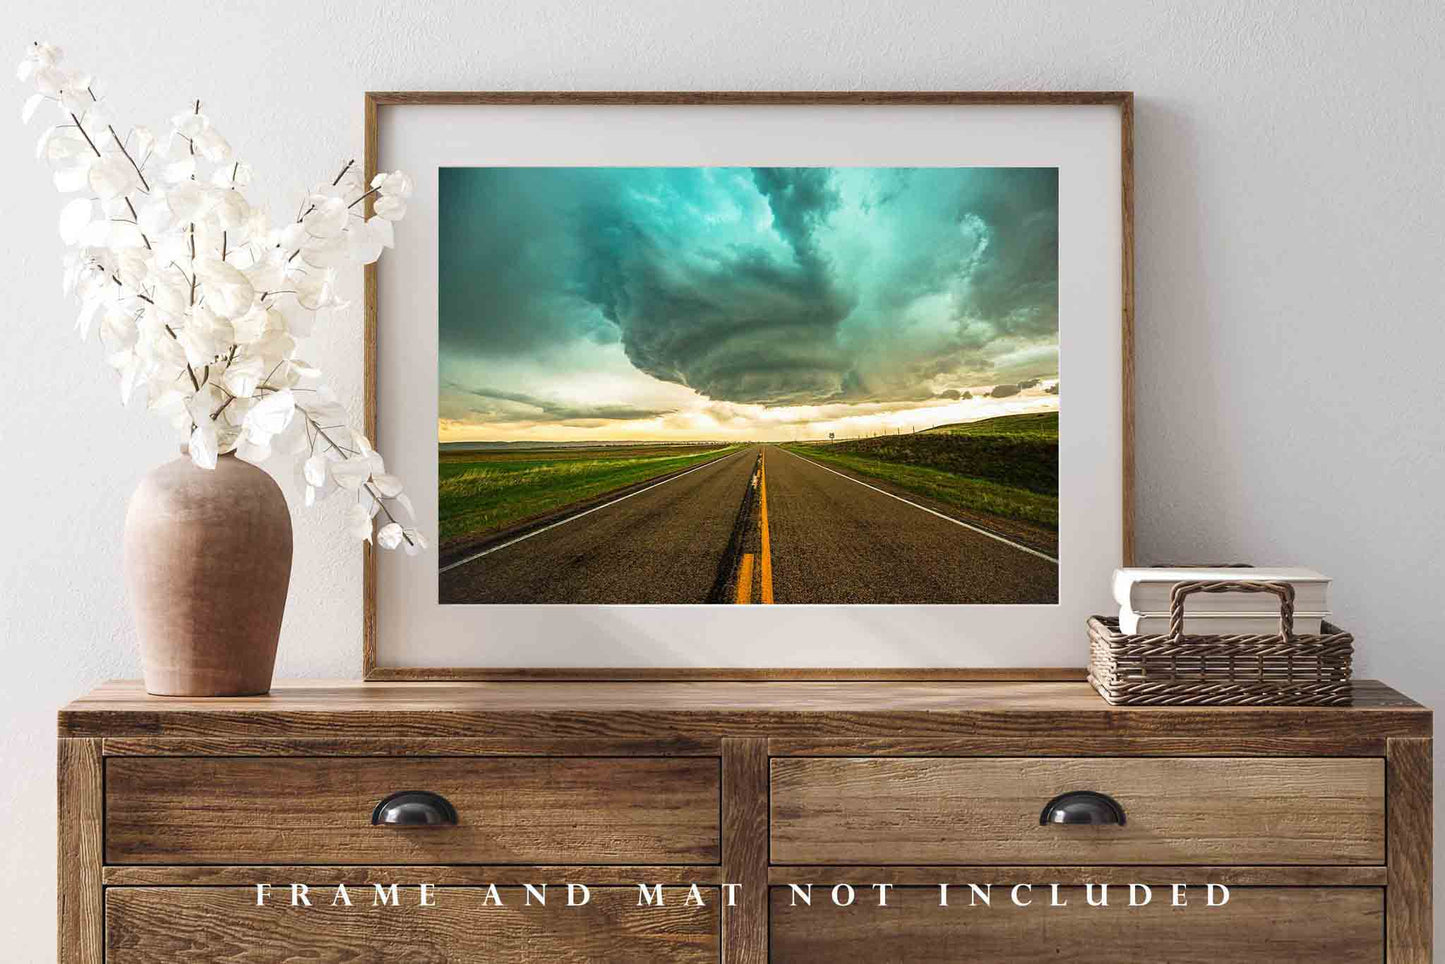 Storm Photography Print (Not Framed) Picture of Supercell Thunderstorm Over Highway in Nebraska Weather Wall Art Adventure Decor